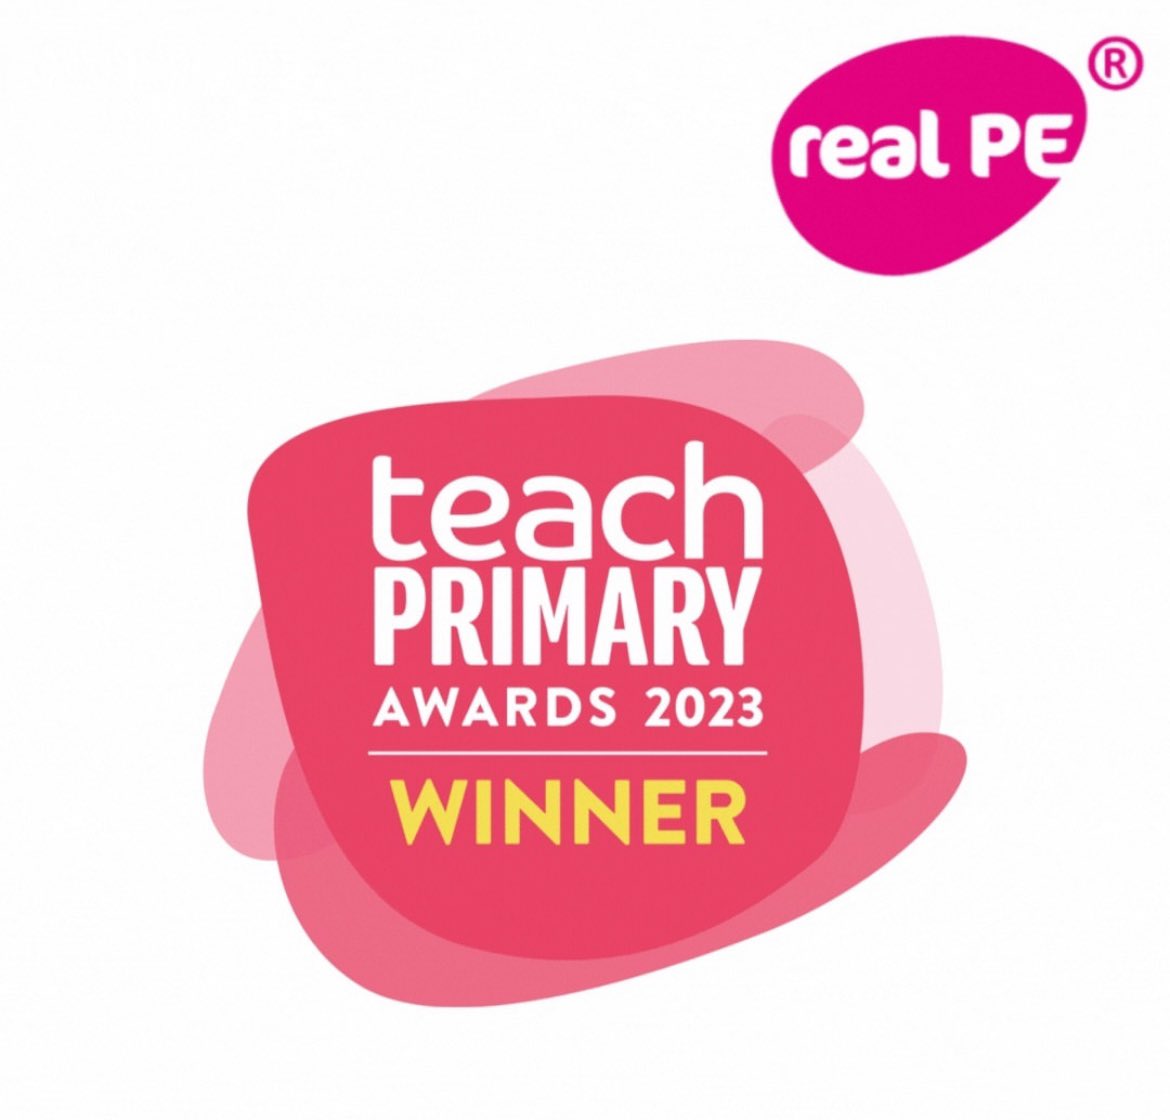 Award winning professional learning @Create_Dev #realPE if you’re @FortiusPE conference today come and find out more @creator_jim @BURSTSapp